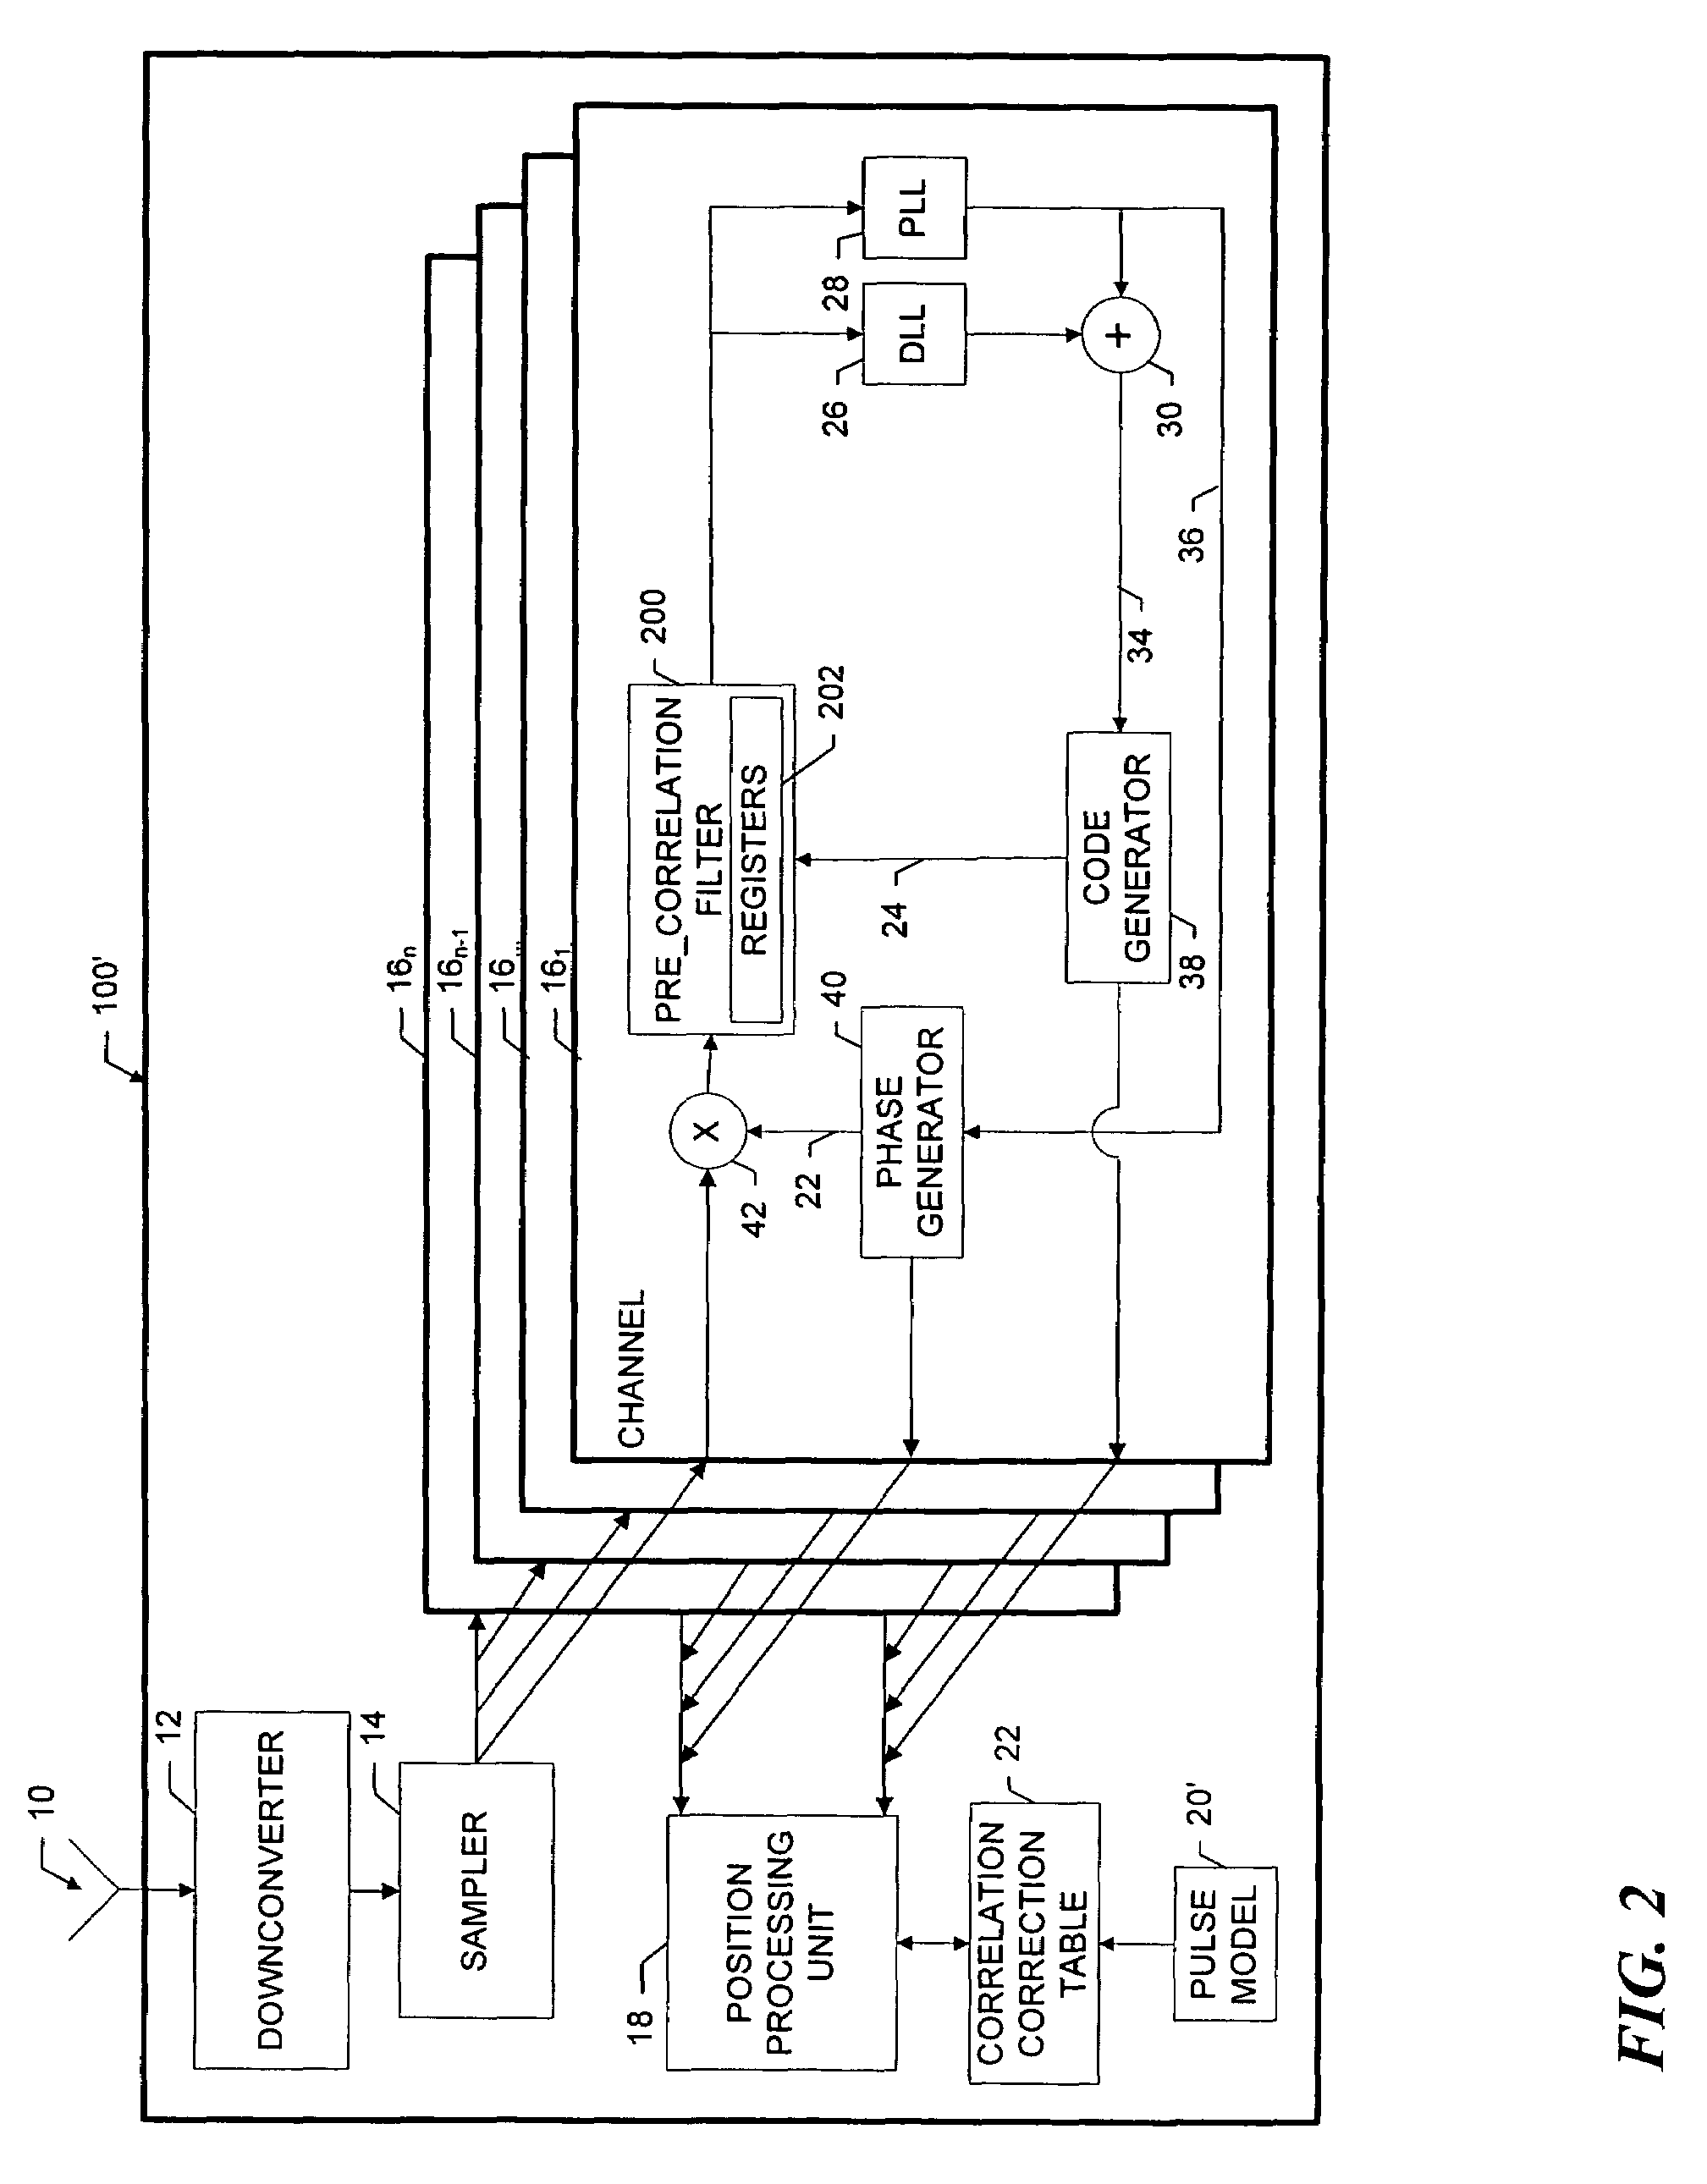 Apparatus for and method of improving position and time estimation of radio location devices using calibrated pulse shapes